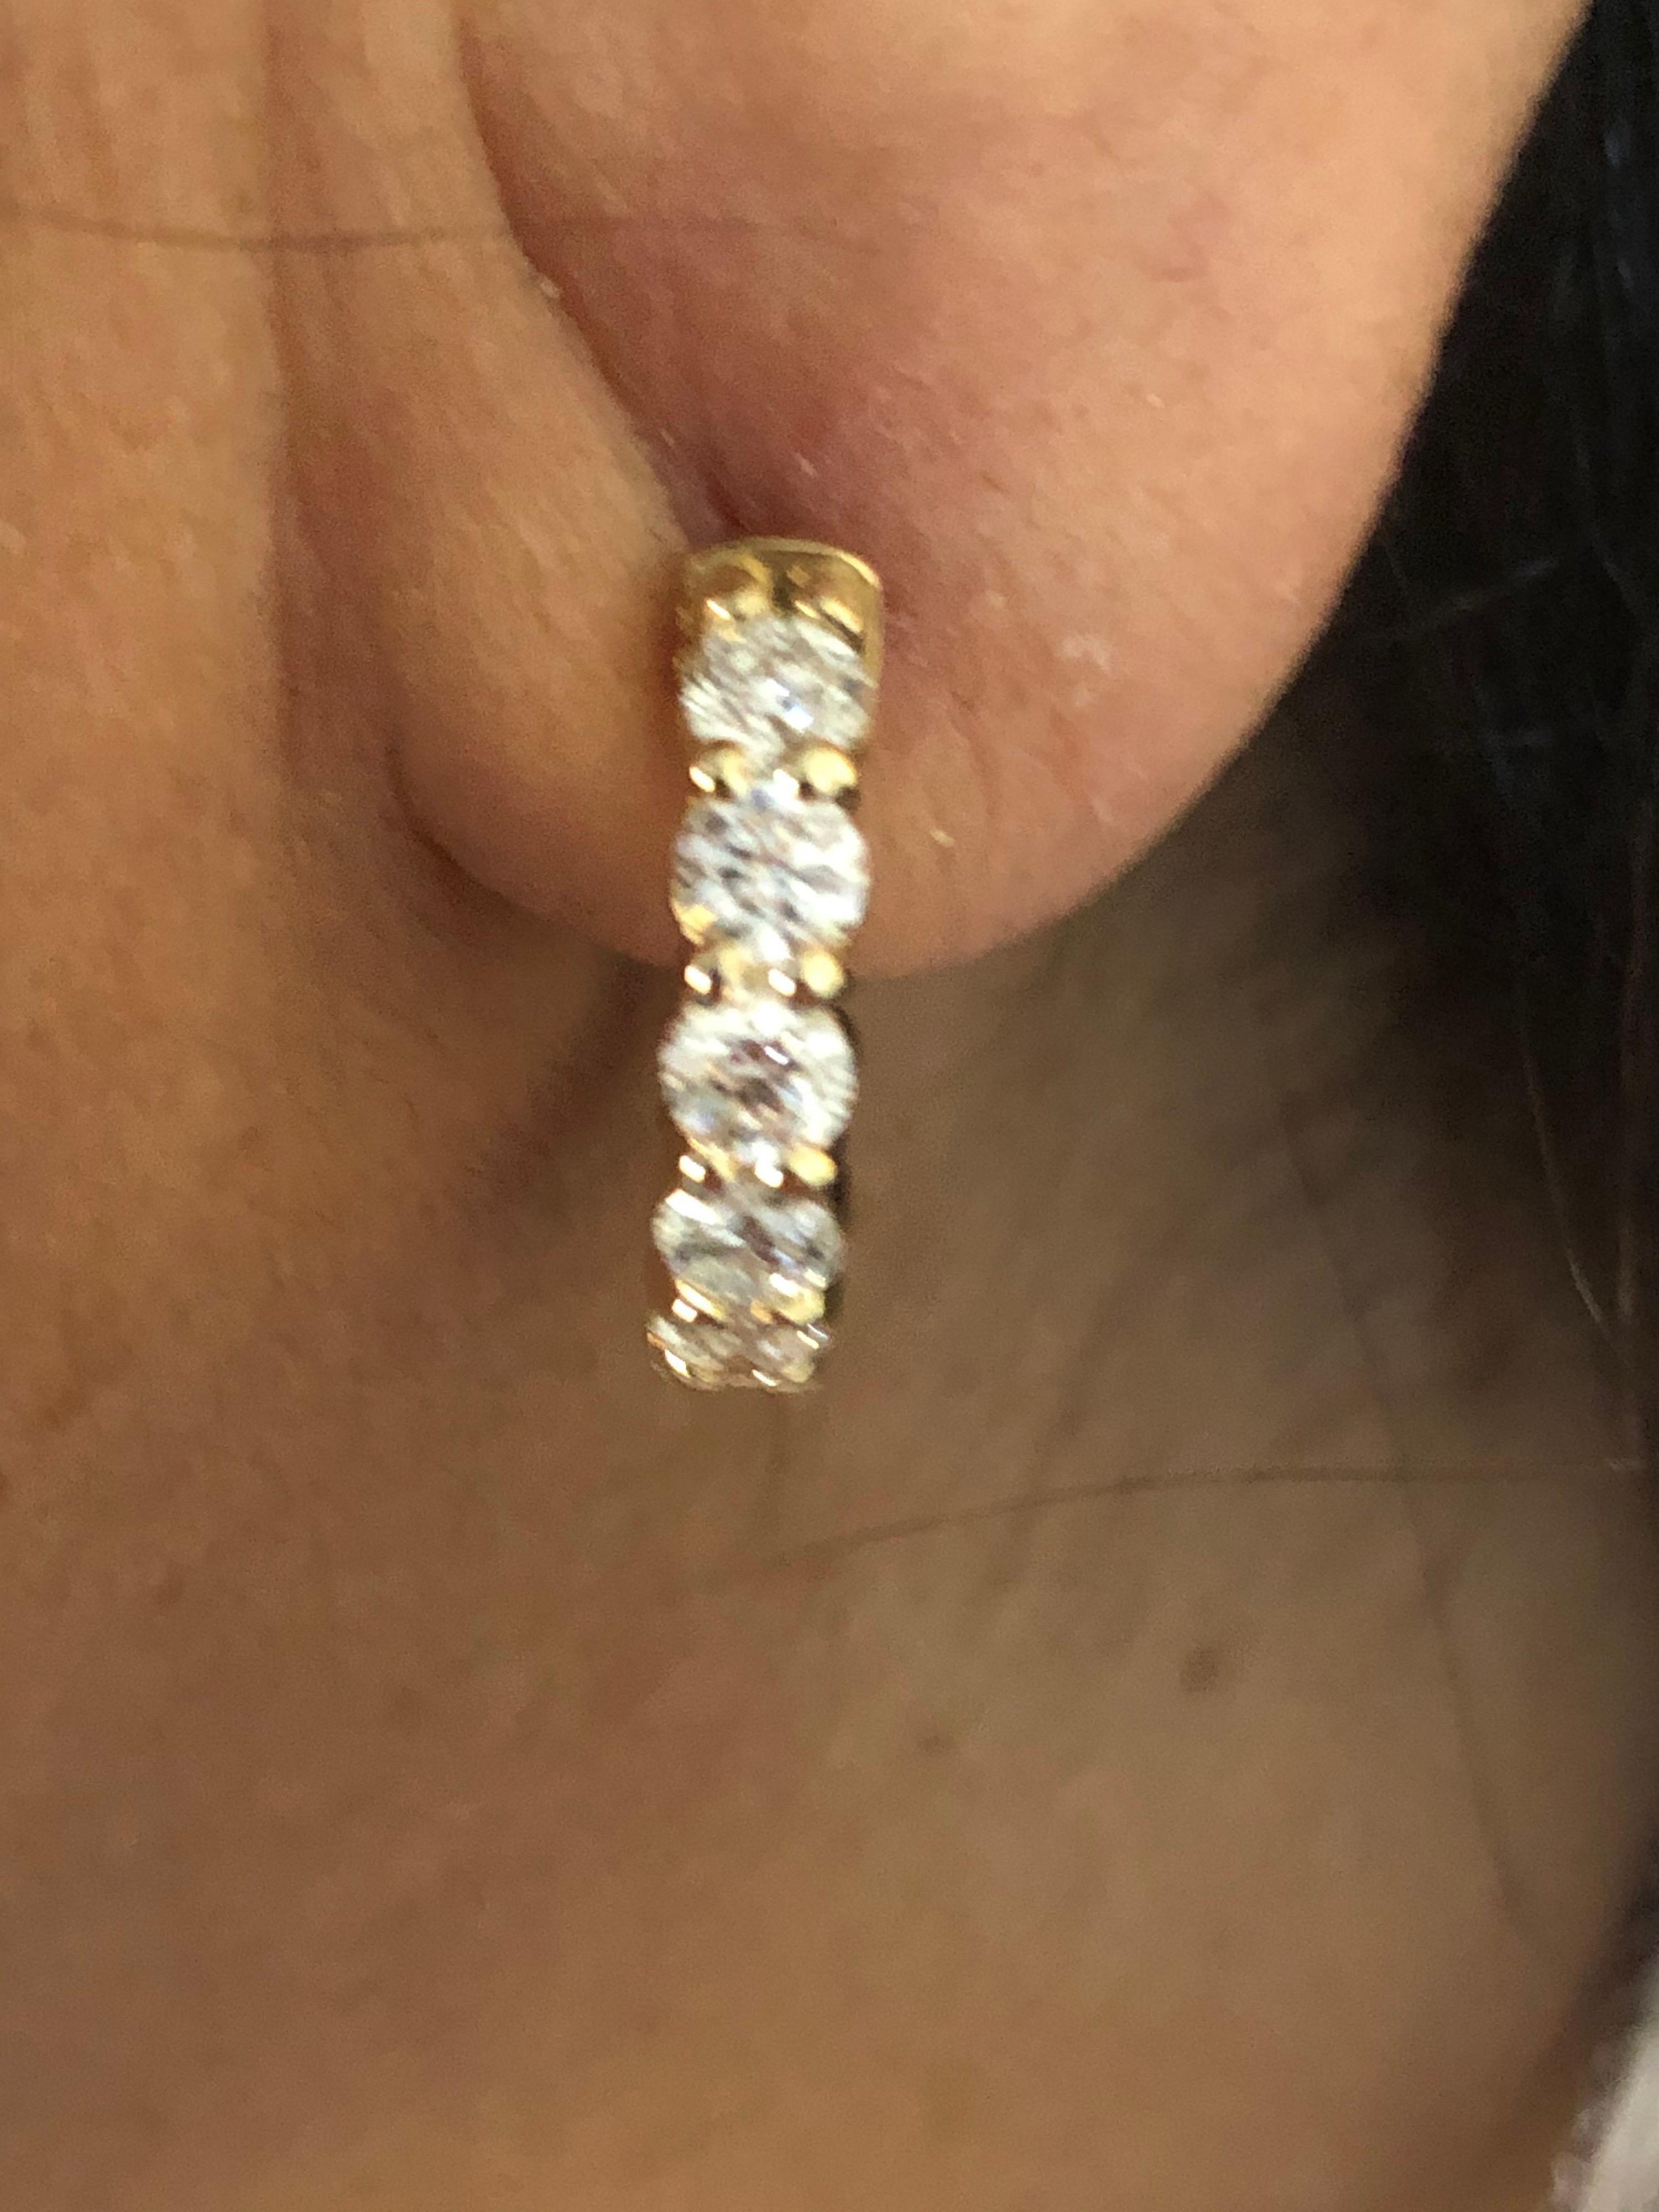 Diamond huggies set in 14K yellow gold. The total weight of the huggies is 2.00 carats. The earrings are set with 10 stones on the outside each weighing 0.20 carats. The color of the stones are G, the clarity is SI1. The diameter is 1/2 an inch. The